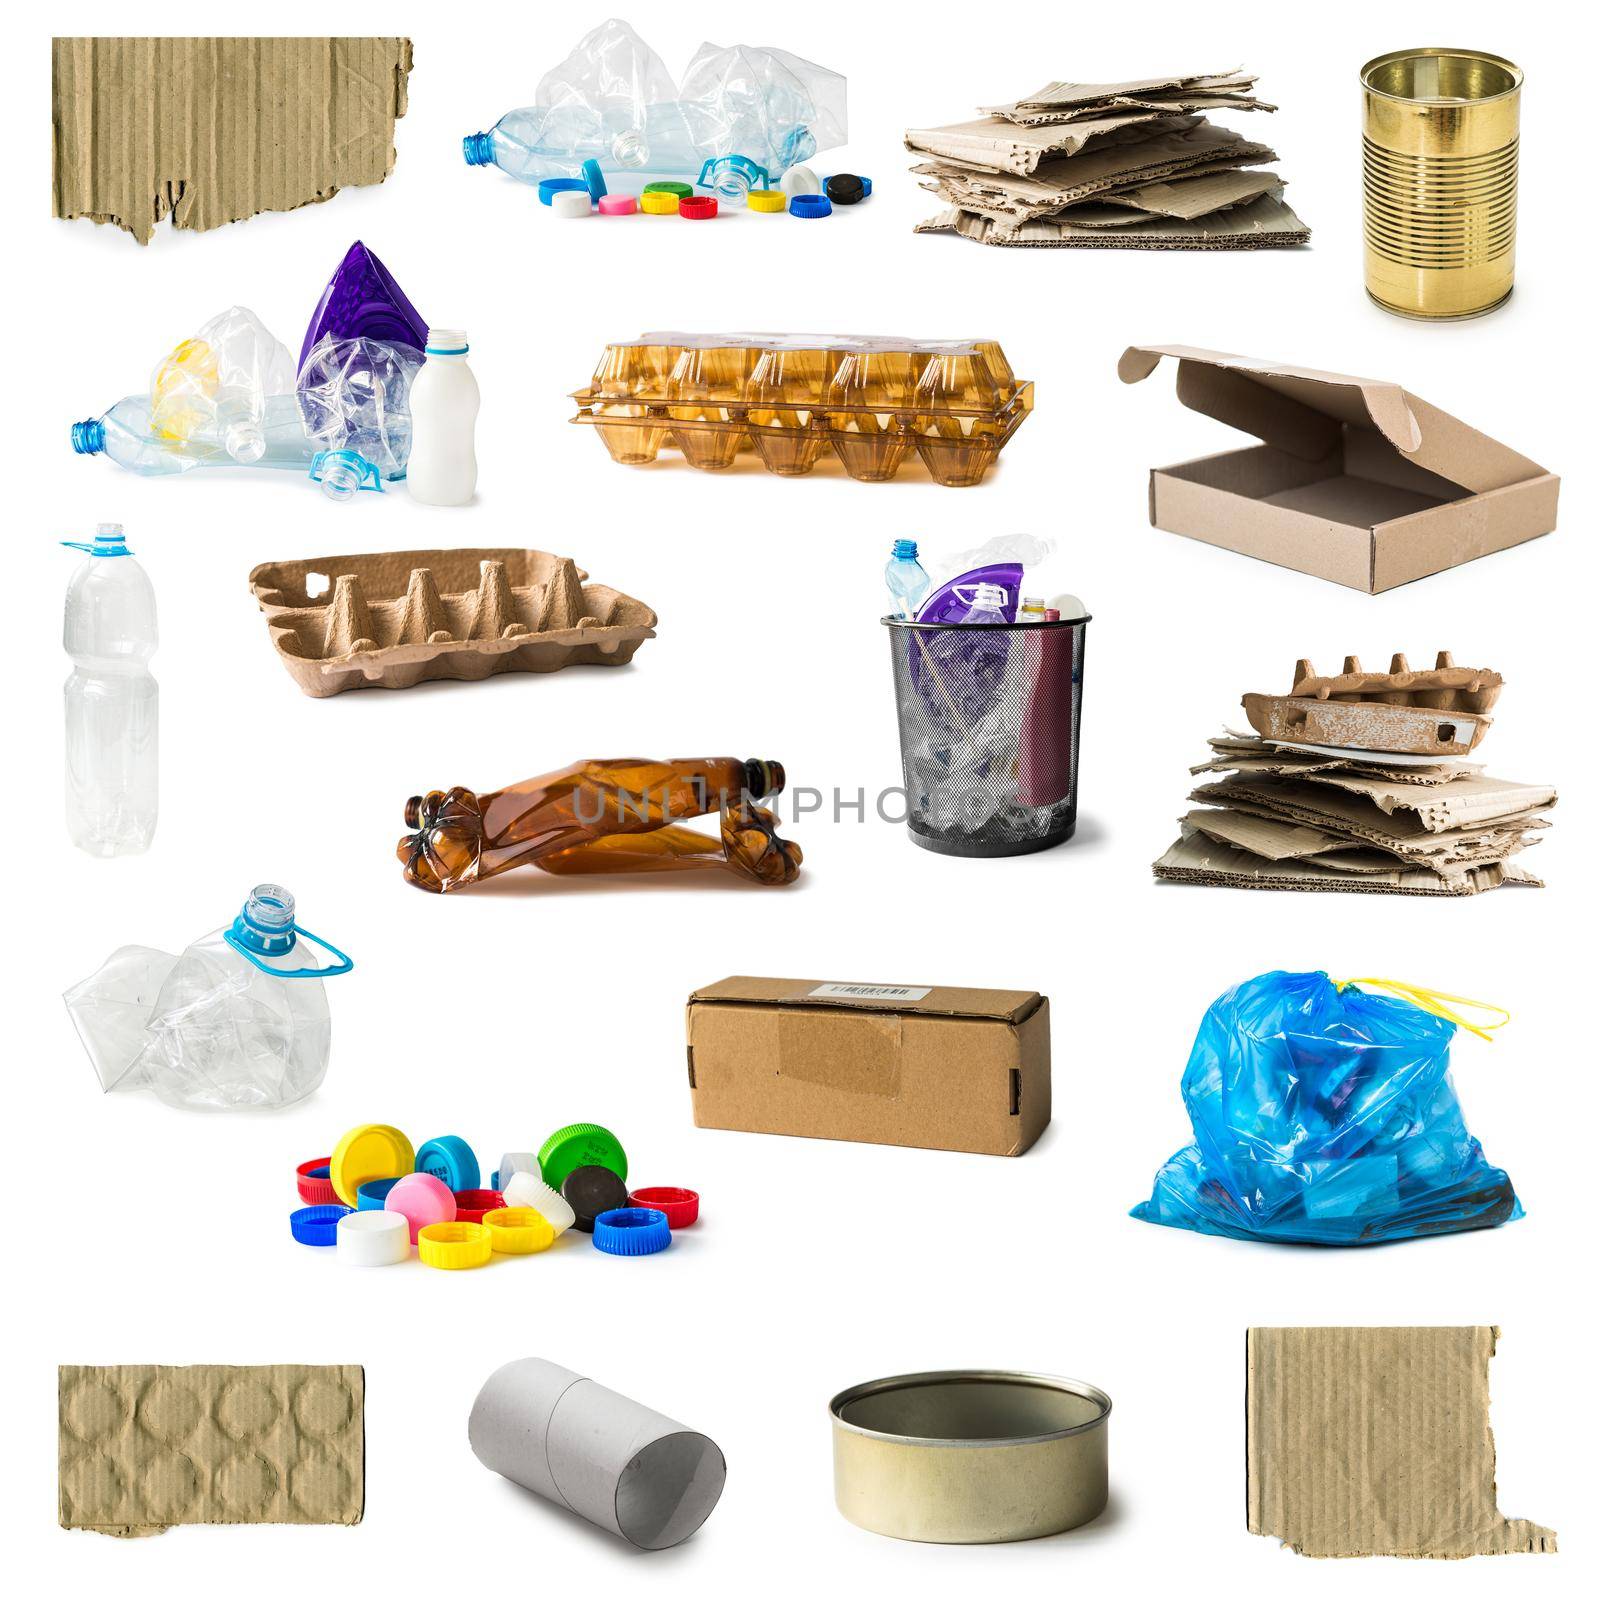 collage of plastic and carton rubbish isolated on white background